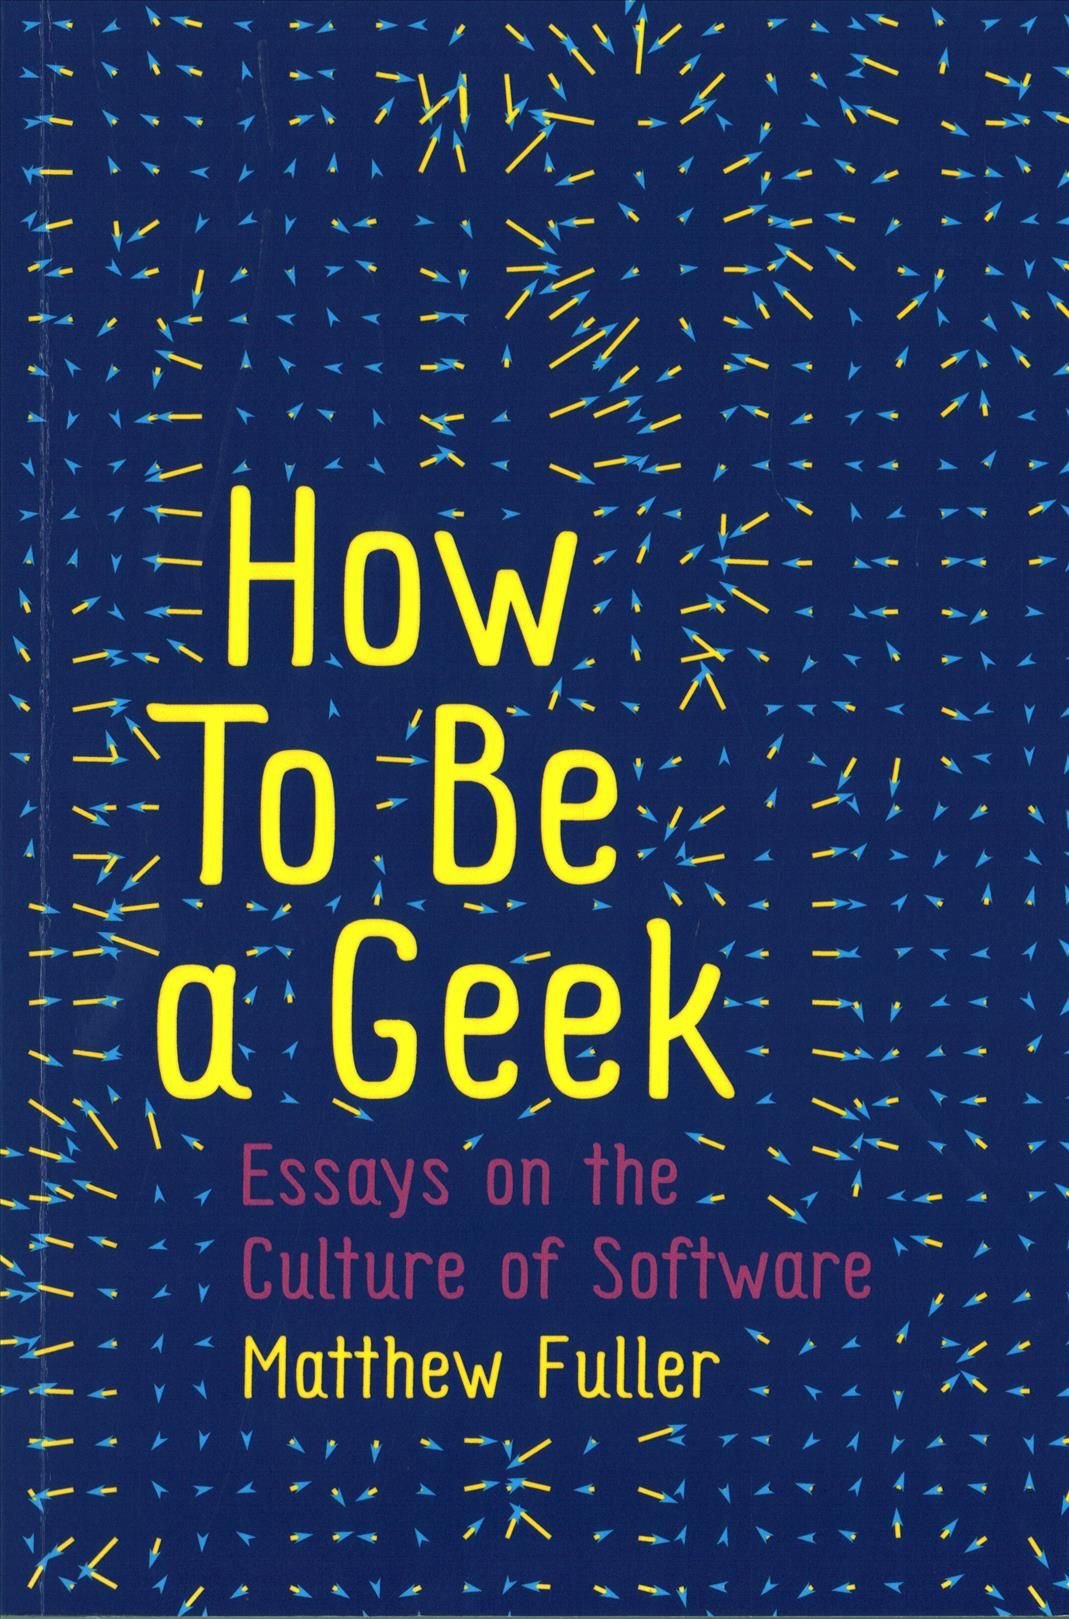 How To Be a Geek